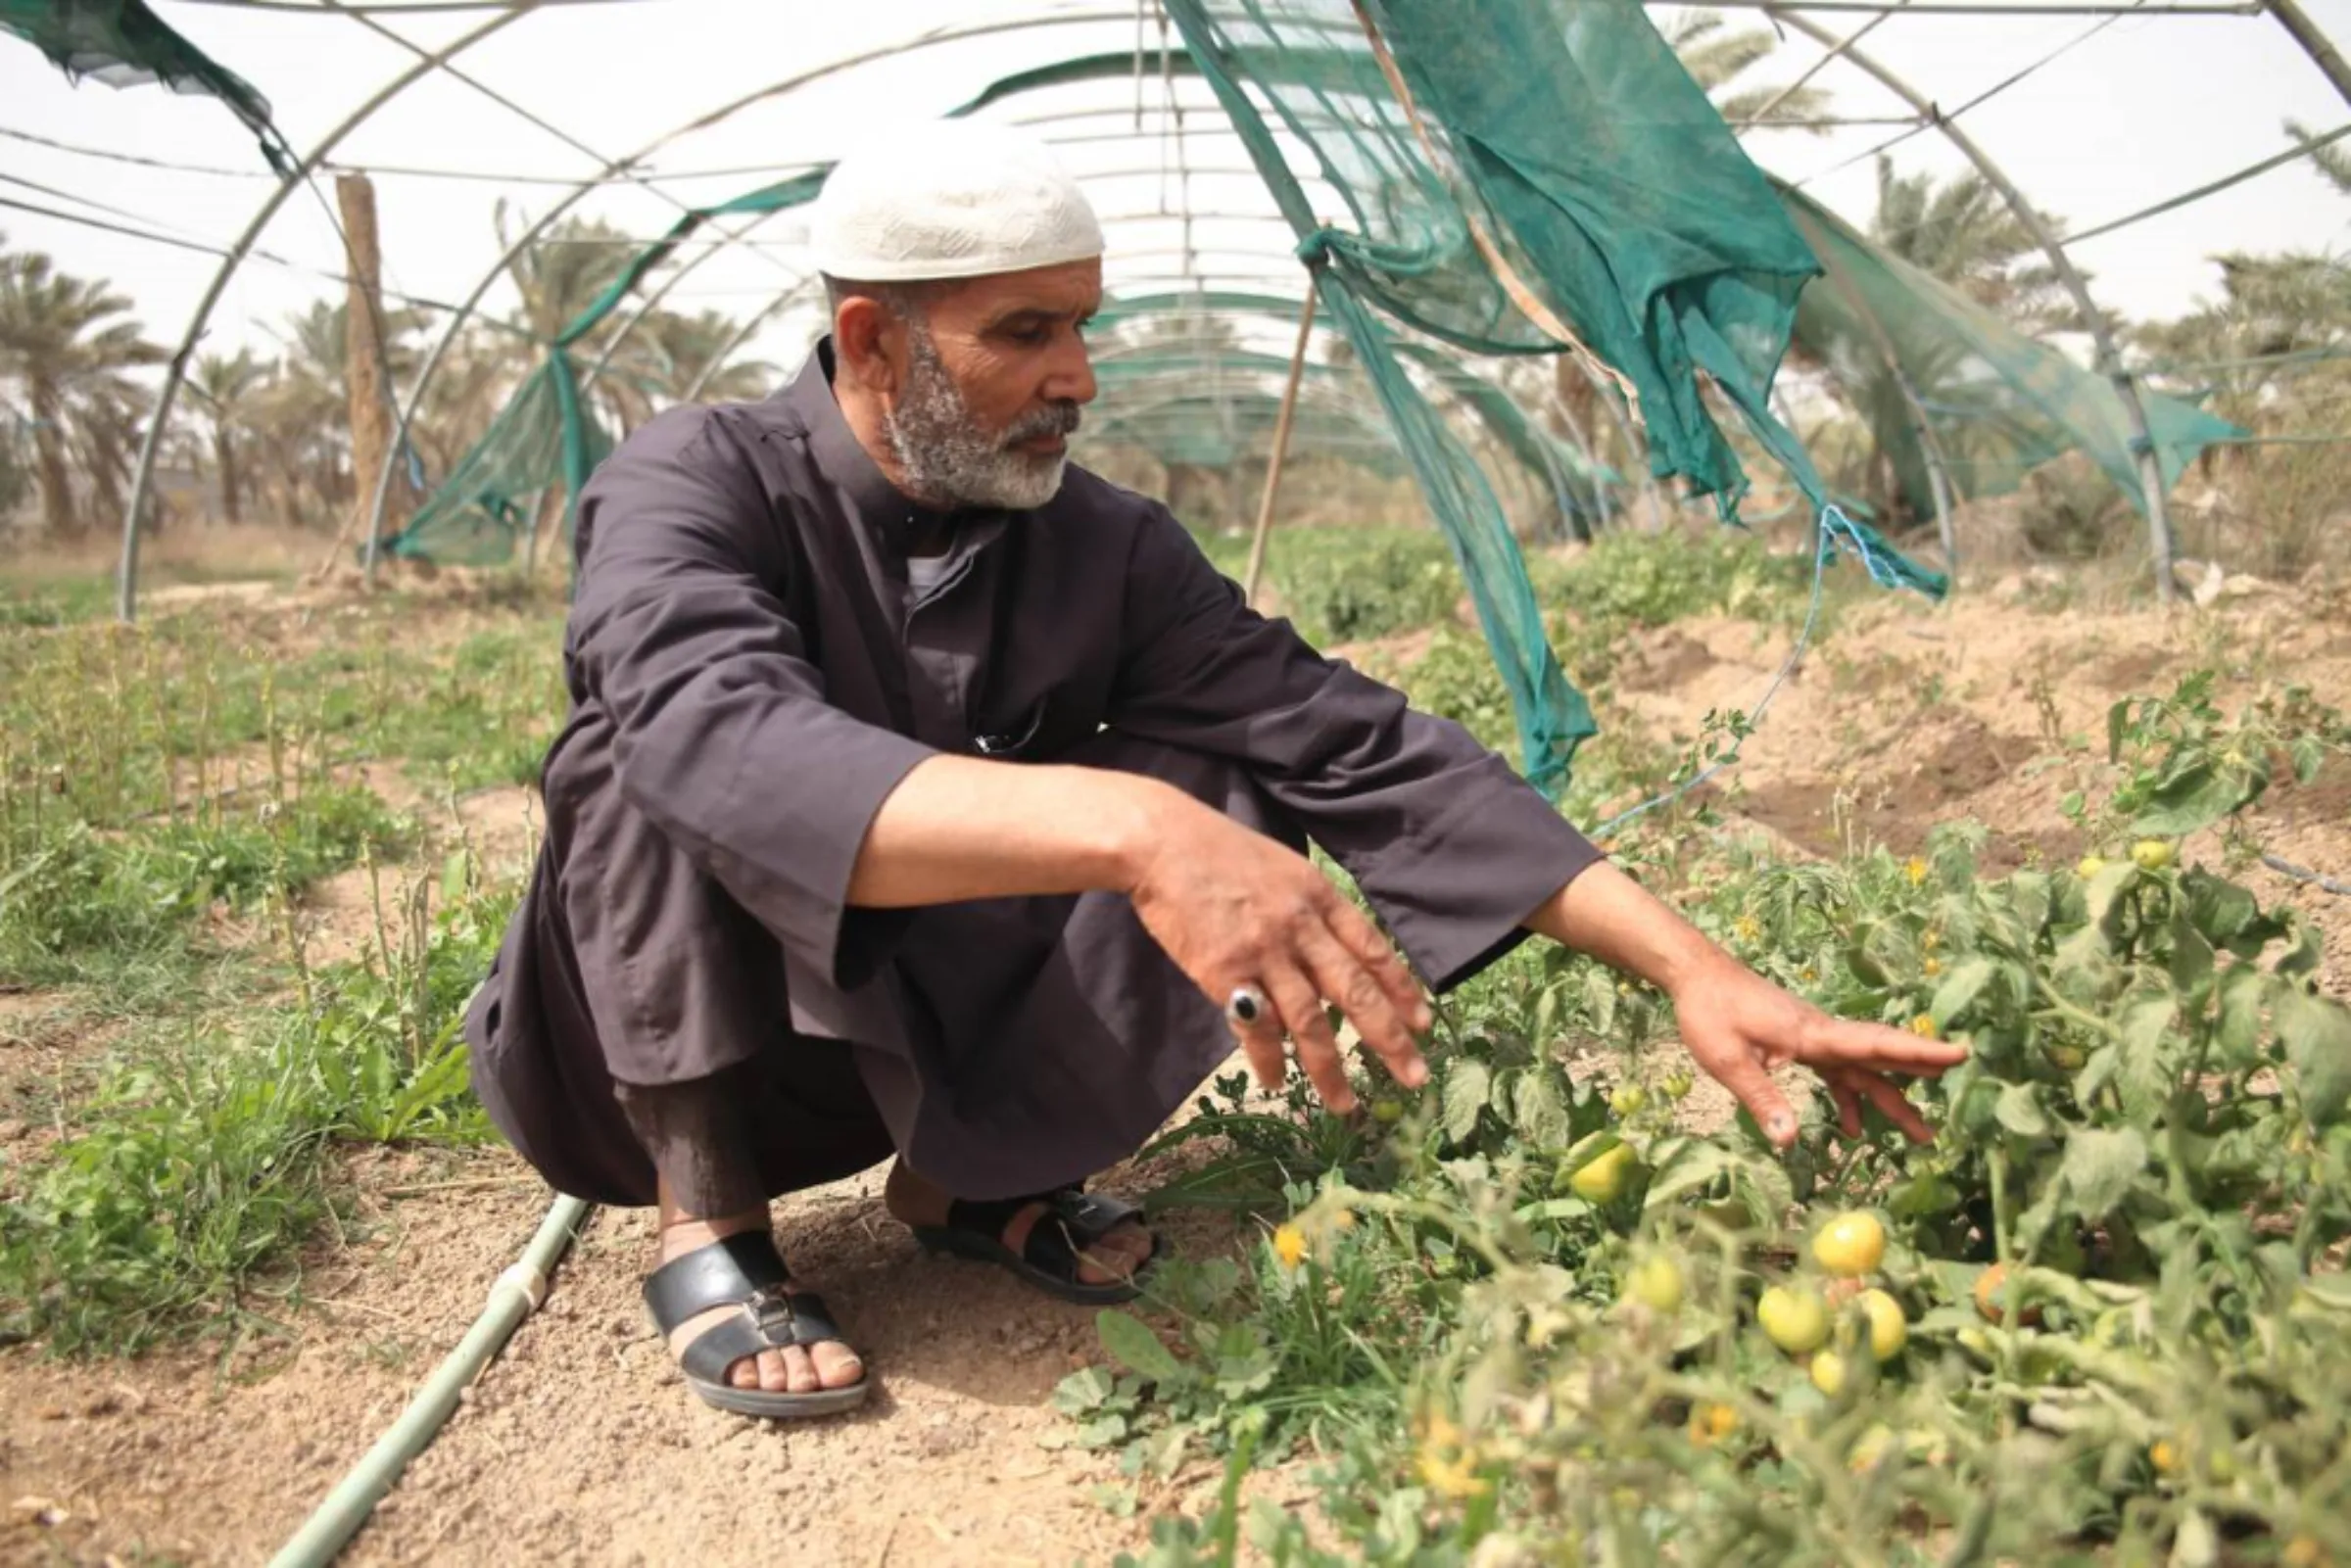 Qasim Abdul Wahad, an Iraqi small-scale farmer, looks at his dying tomato crops on his farm near the village of Abu Al-Khaseeb in southern Iraq’s Basra governorate, March 6, 2022